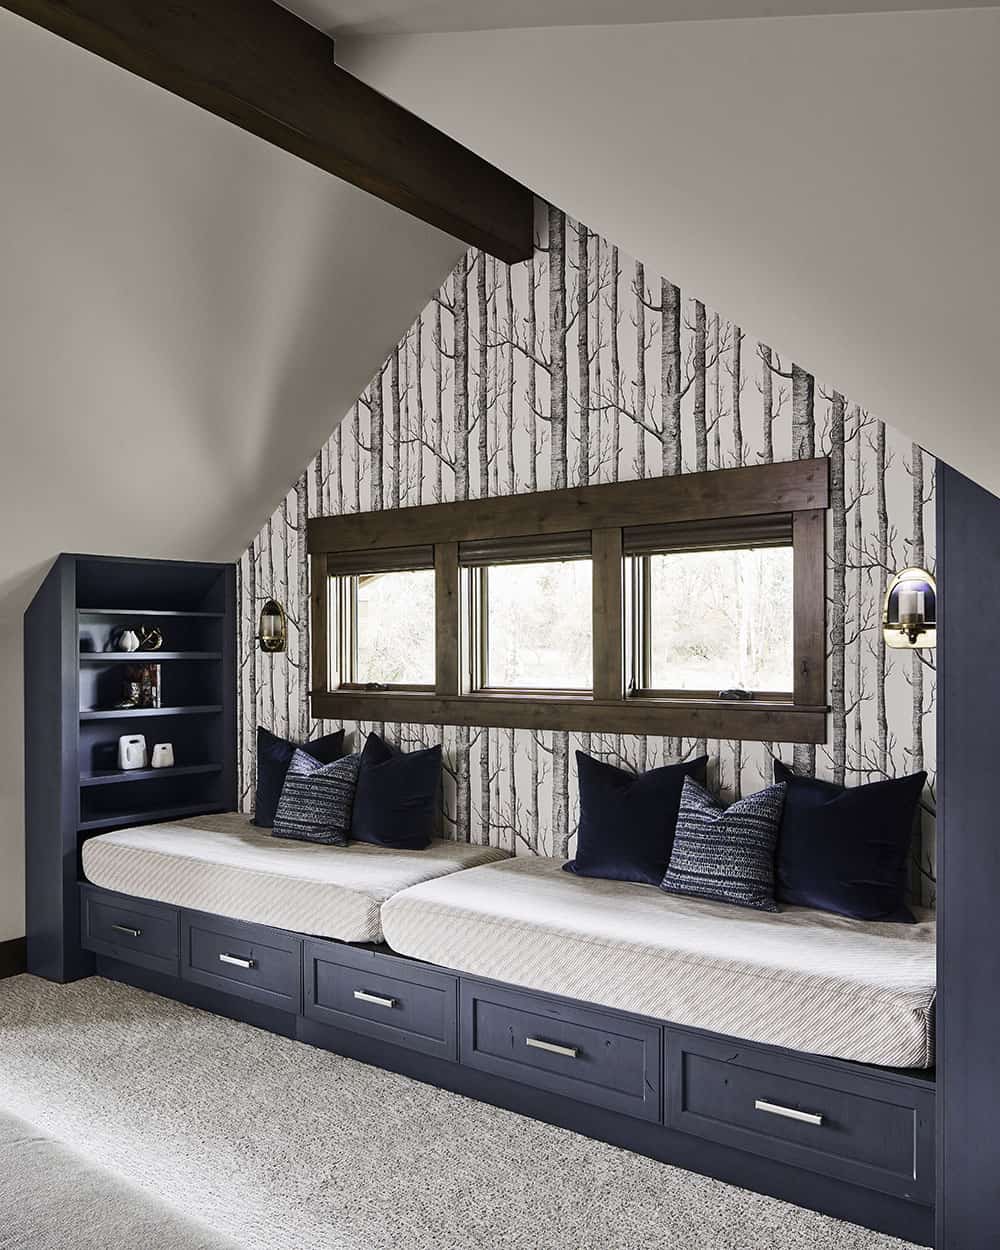 lodge-style-attic-family-room-built-in-bed